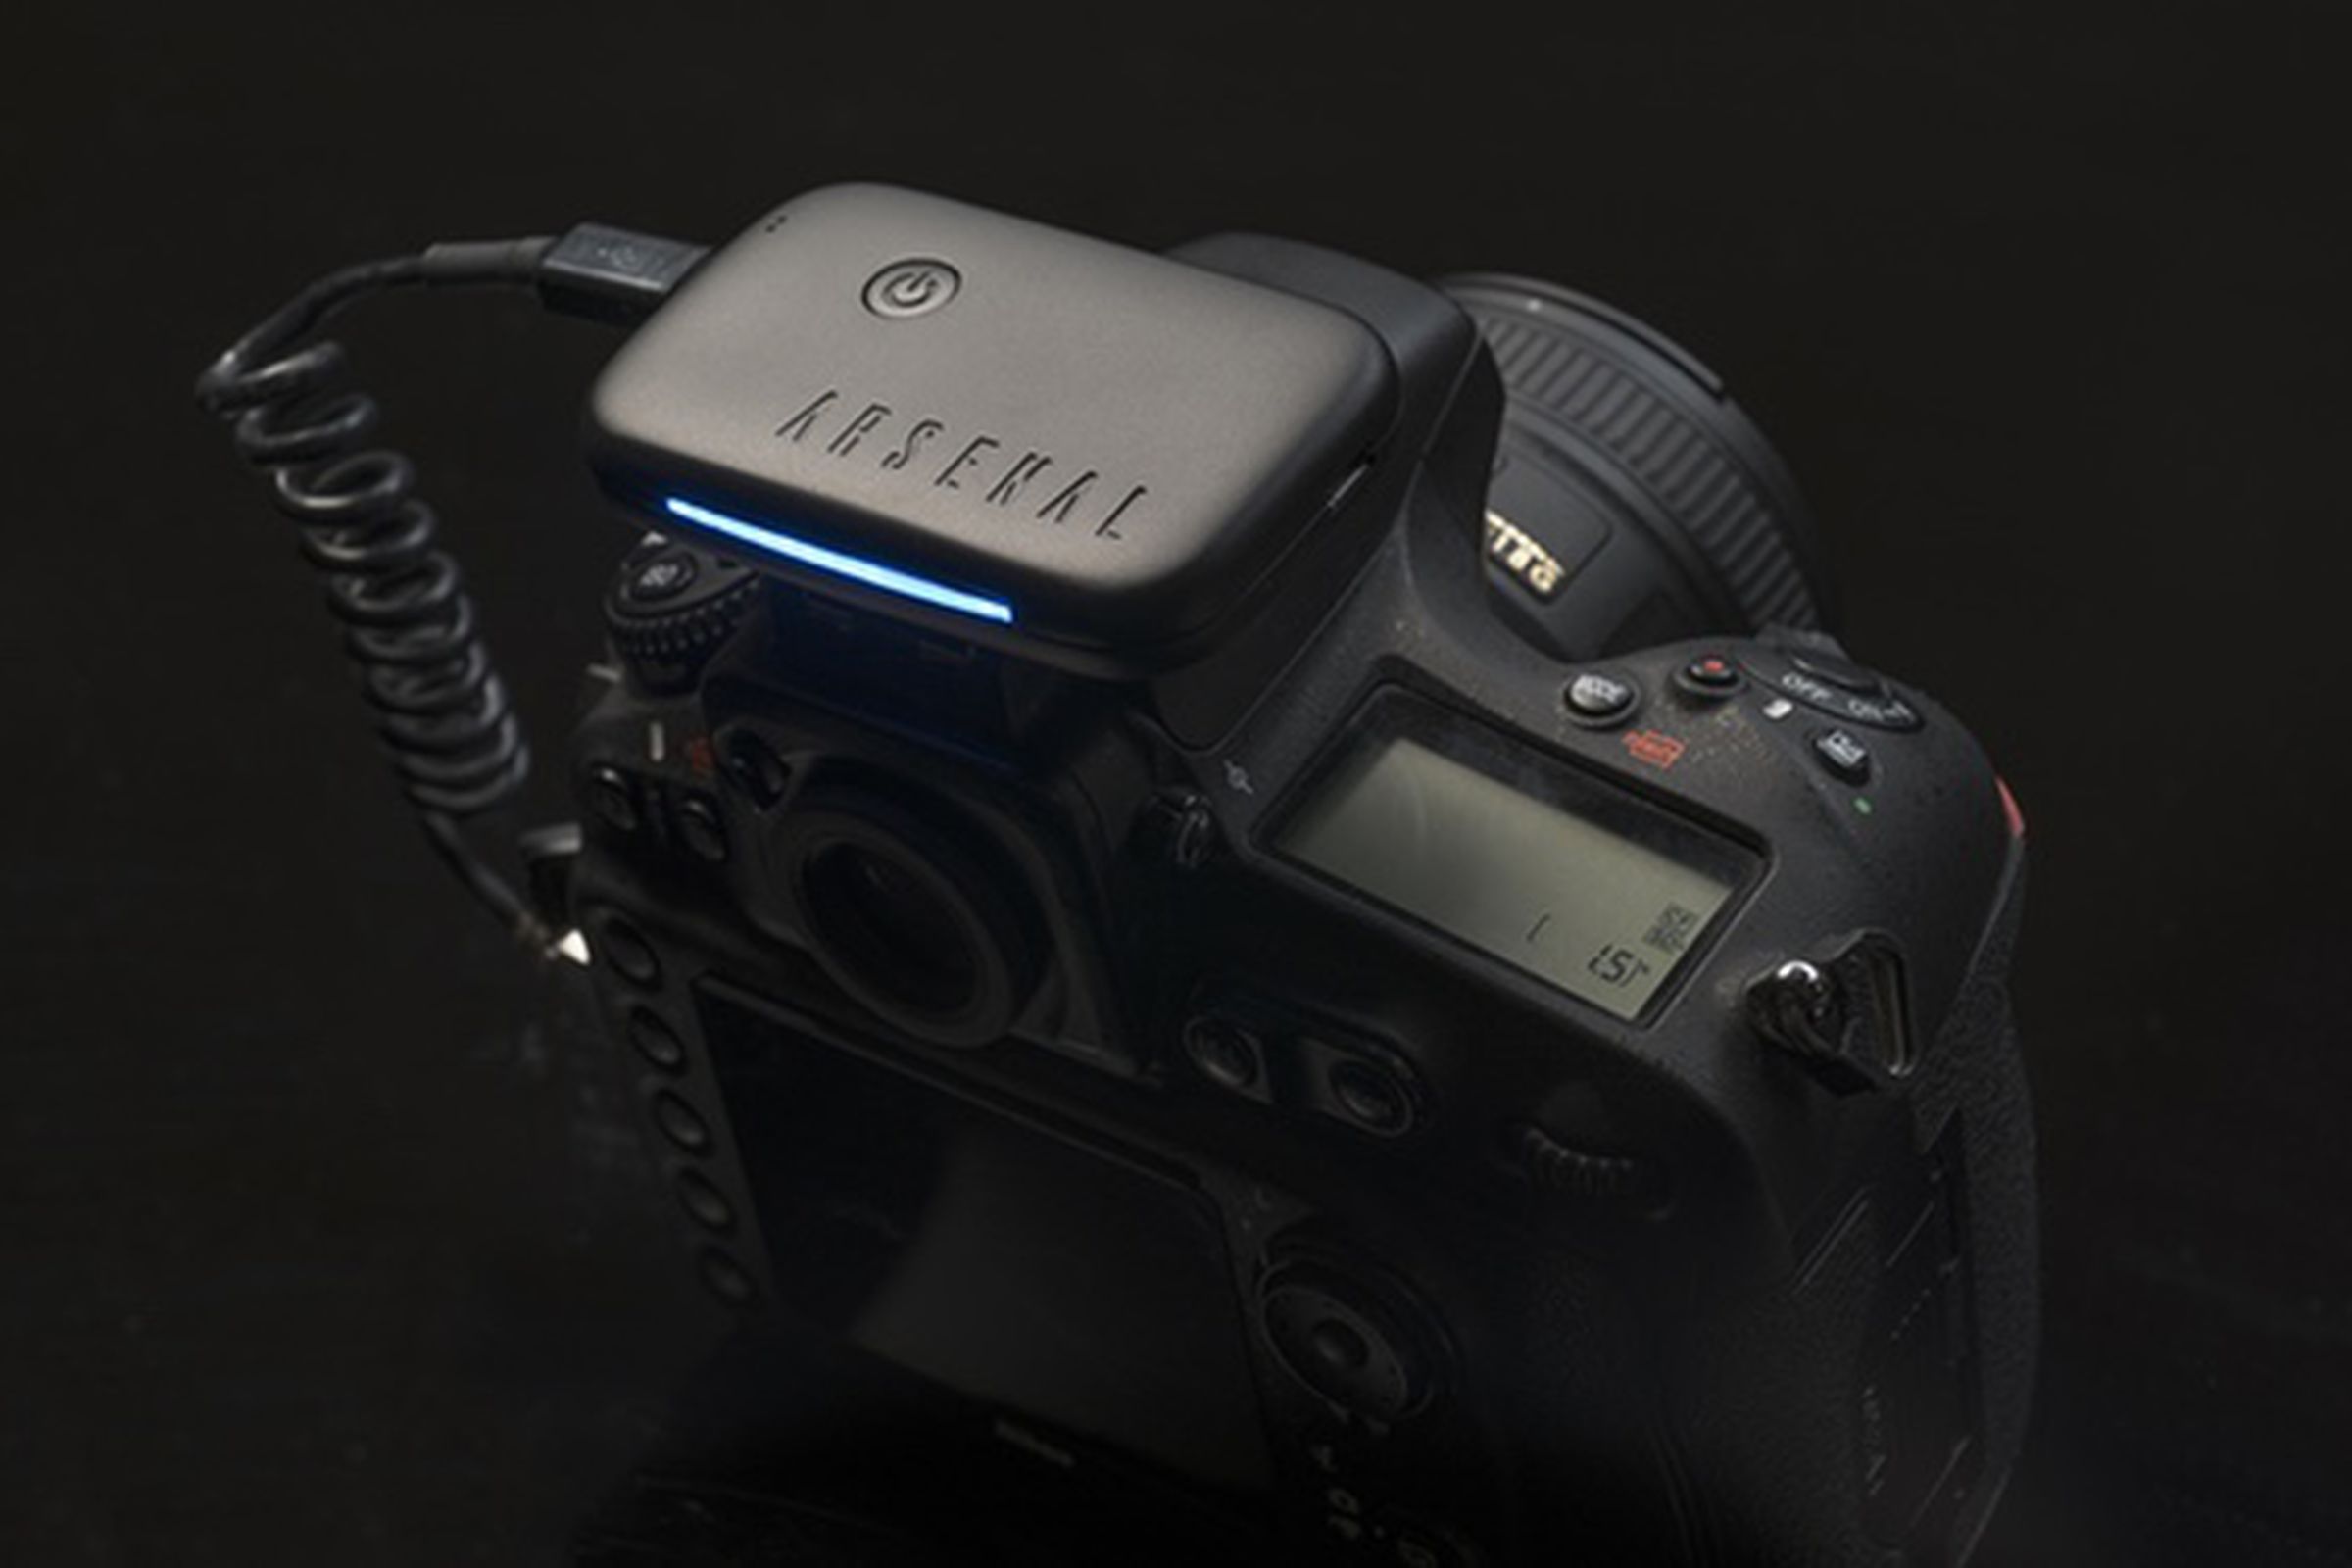 The Arsenal looks like a slim battery pack that clips onto the top of your DSLR camera. 